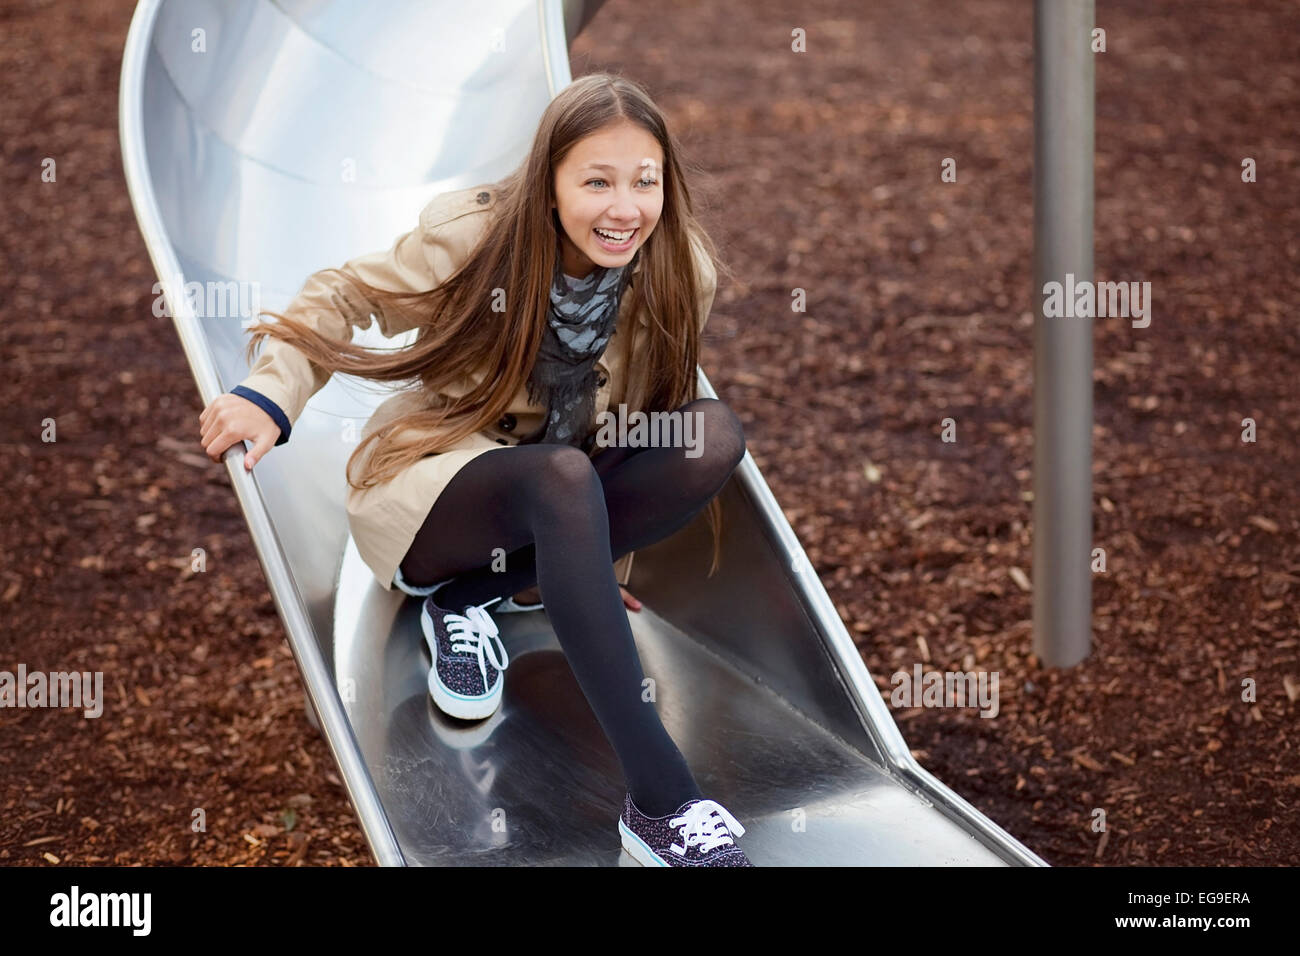 Happy teenage girl messing about on a slide in a playground Stock Photo